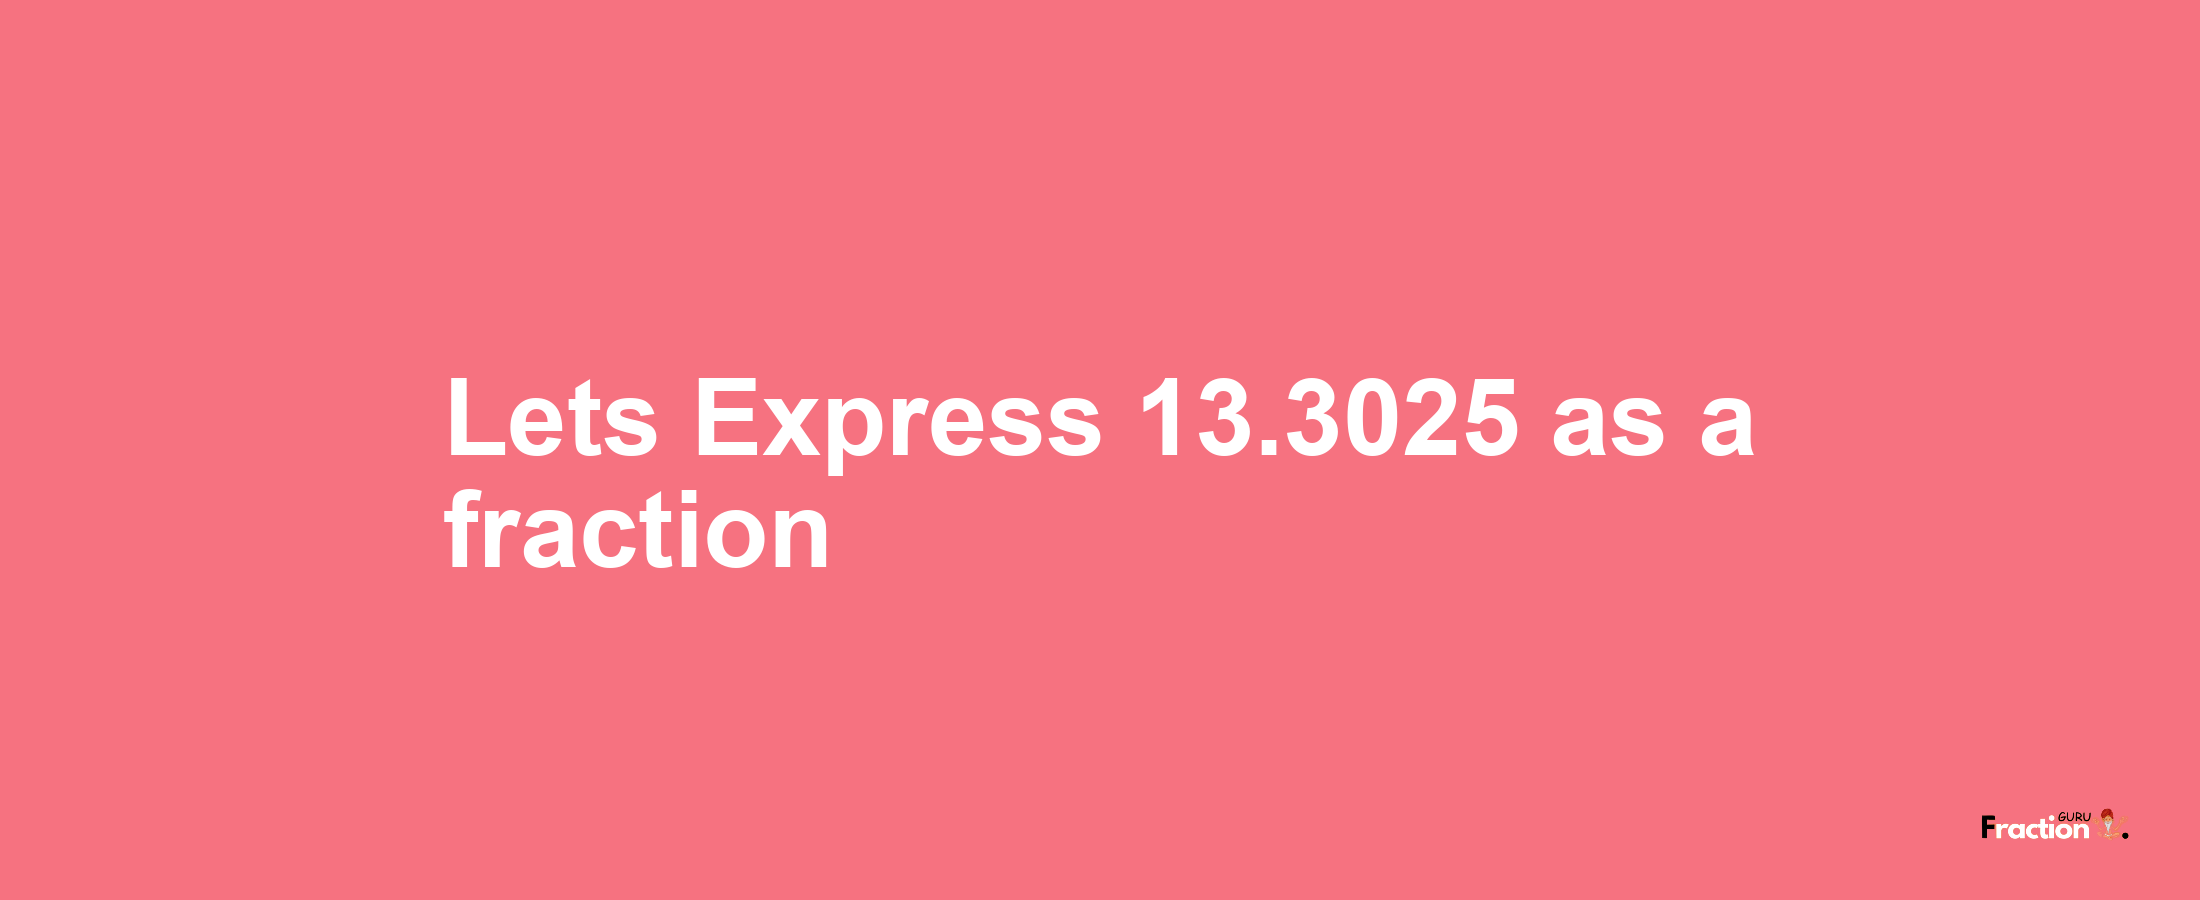 Lets Express 13.3025 as afraction